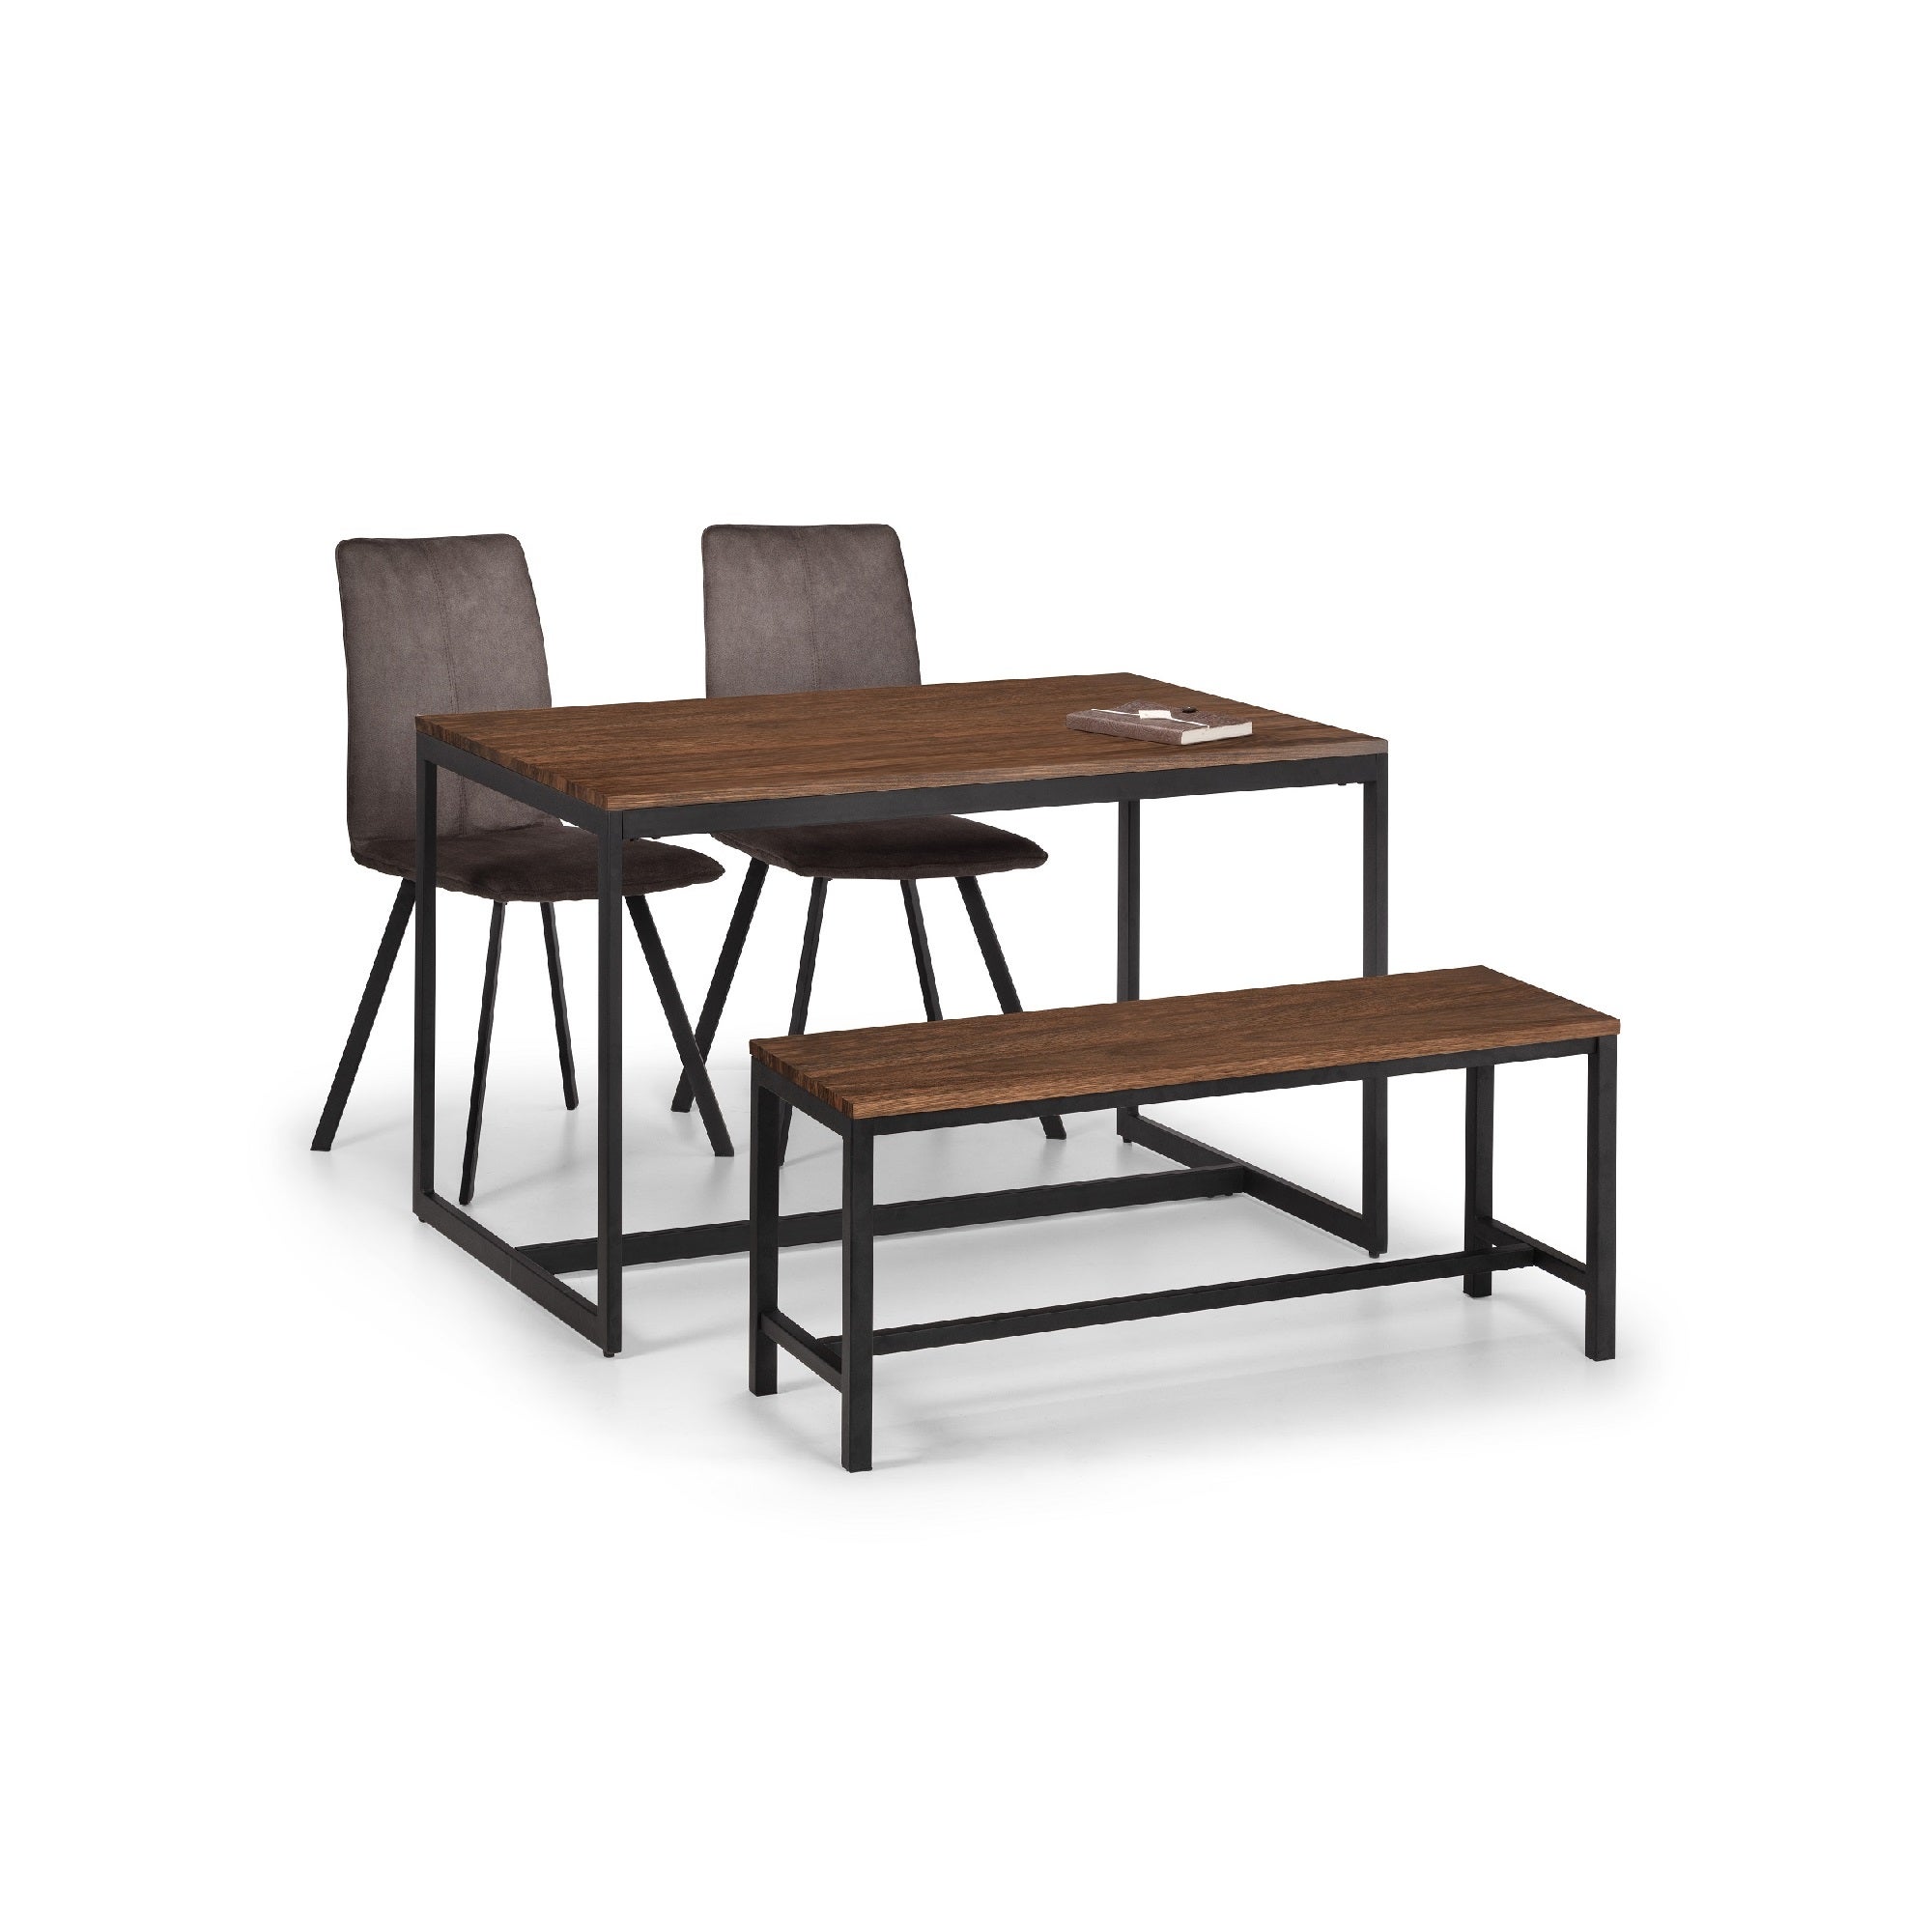 Tribeca Rectangular Dining Table with 2 Monroe Chairs and Bench, Brown Brown